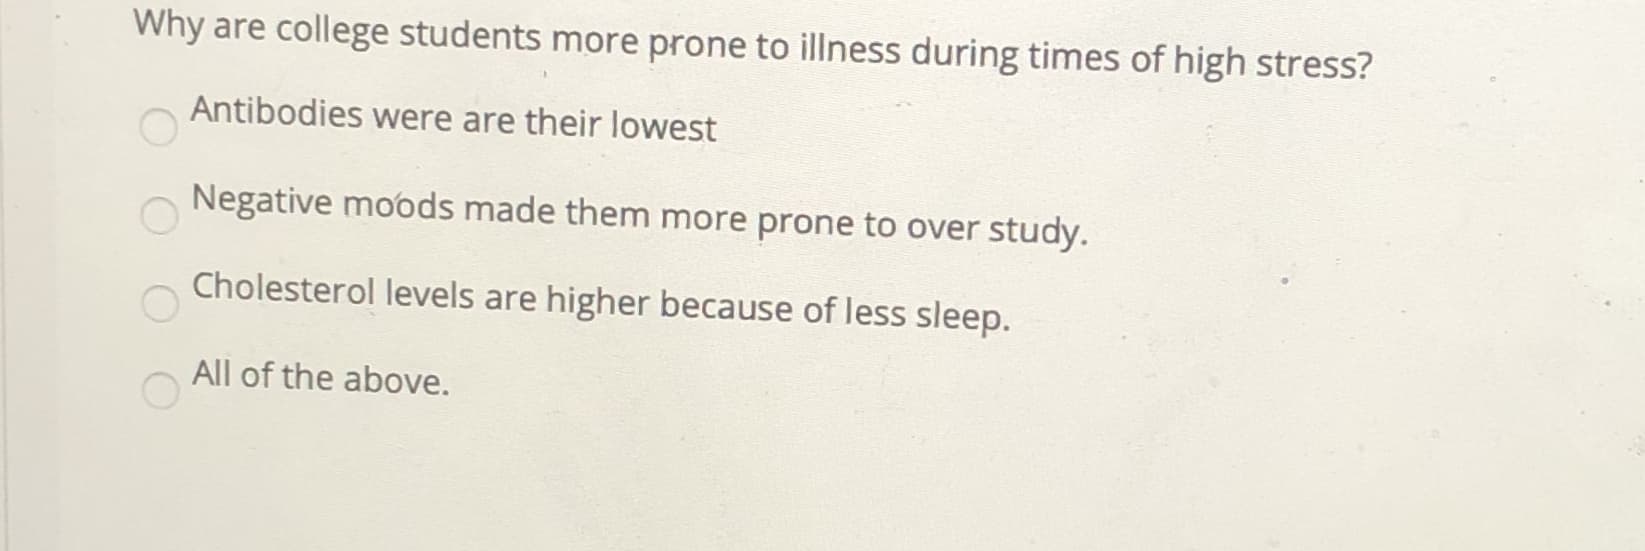 Why are college students more prone to illness during times of high stress?
Antibodies were are their lowest
Negative moods made them more prone to over study.
Cholesterol levels are higher because of less sleep.
All of the above.
